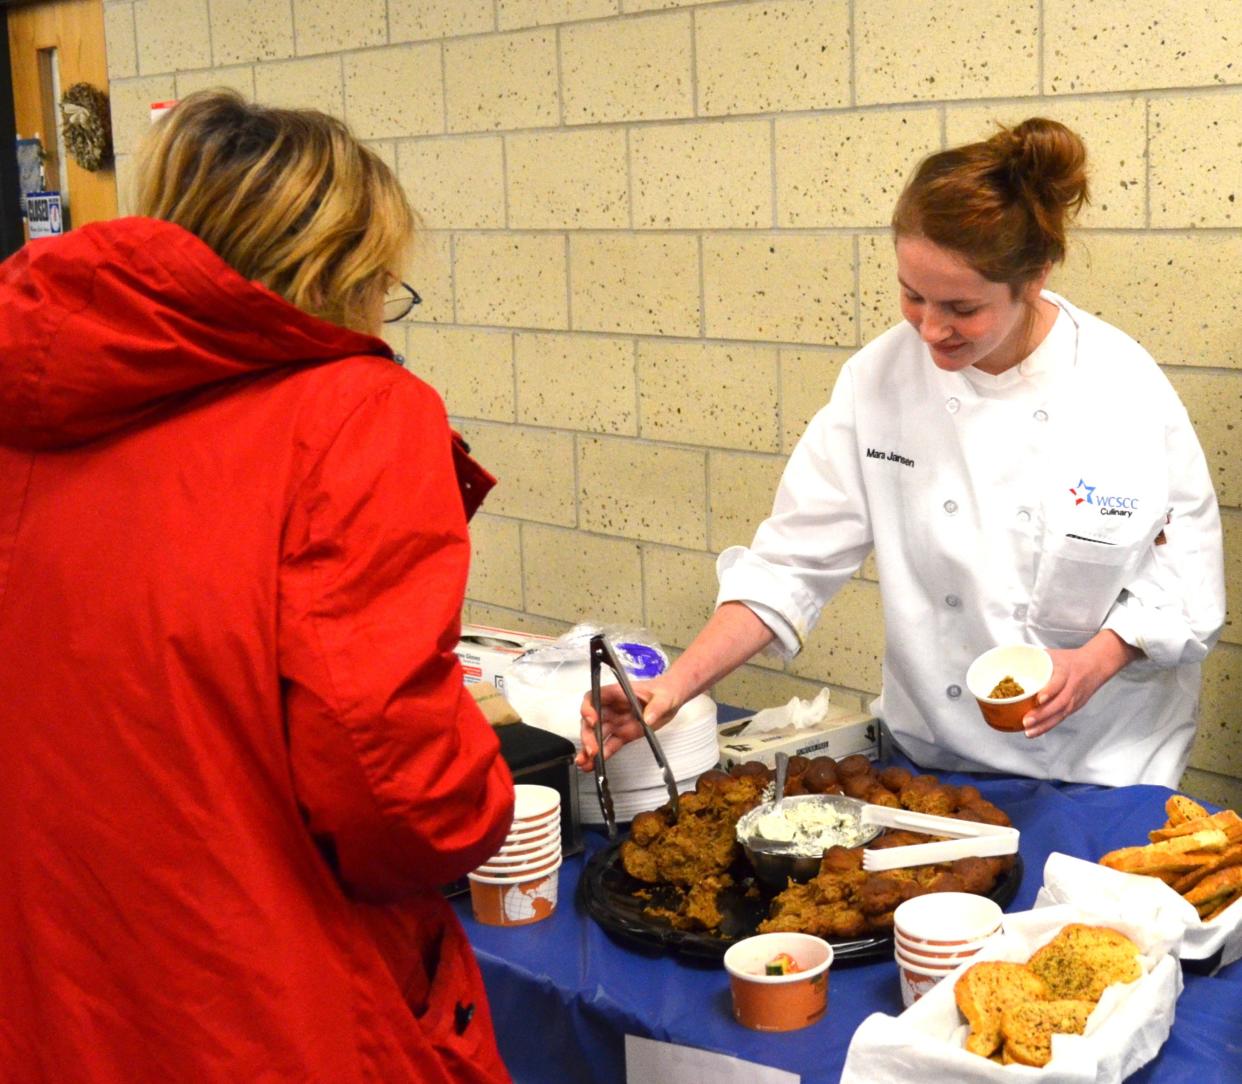 A Culinary Arts student at the Wayne County Schools Career Center serves a guest at a previous Annual Tailgate Party. This year’s event will take place on Wednesday, November 21 from 11am to 1:30pm. Donations taken at the door will benefit the Career Center’s Culinary Arts and Hospitality programs.